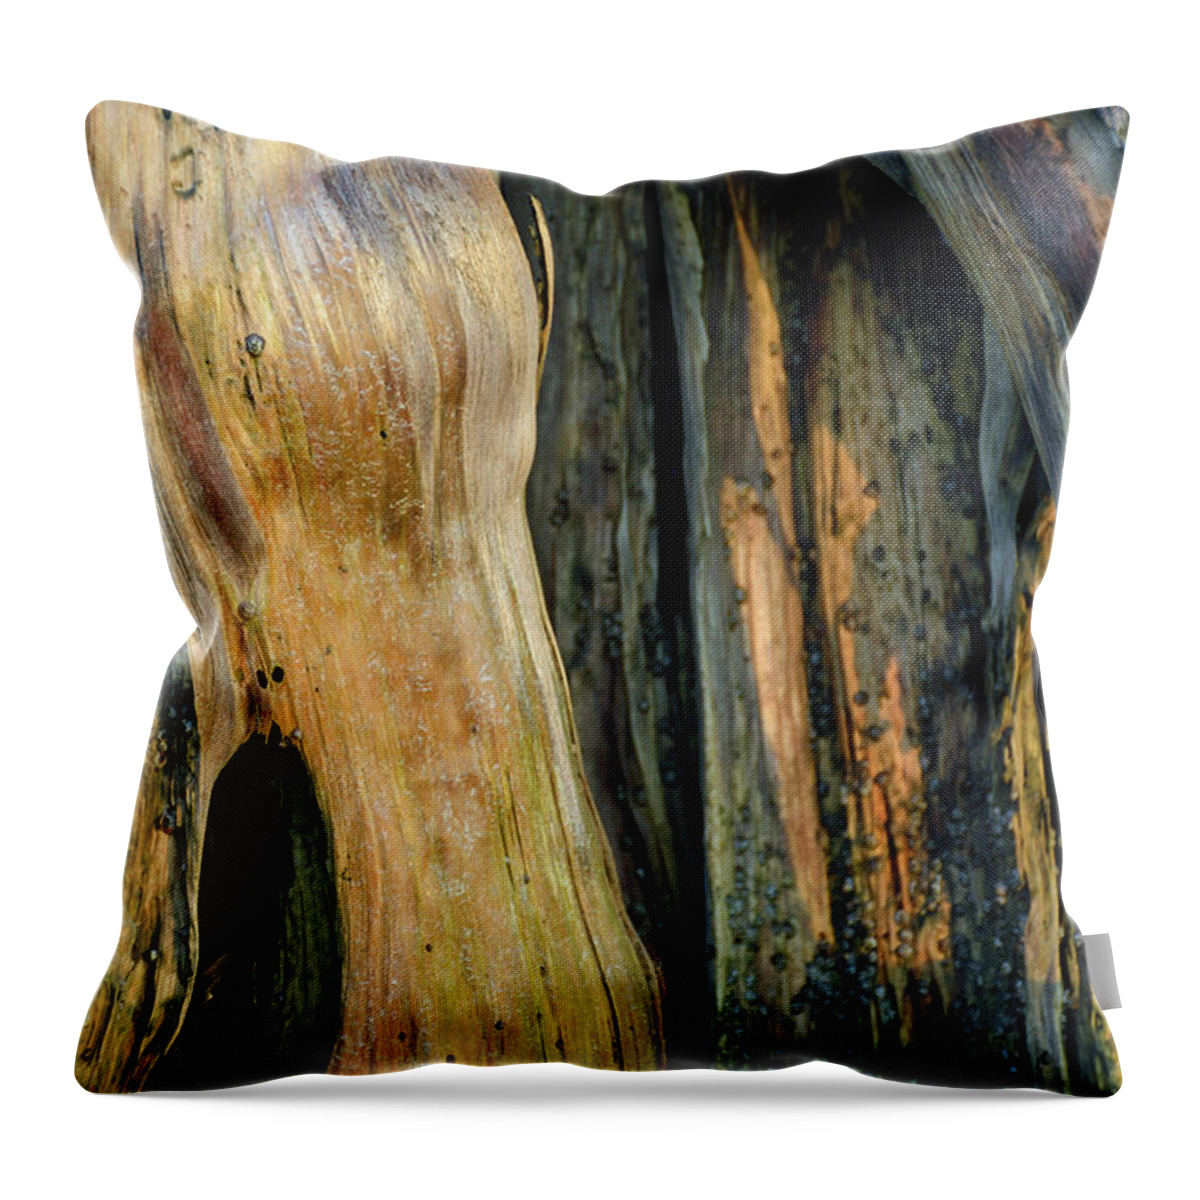 Jekyll Island Throw Pillow featuring the photograph Illuminated Stump 03 by Bruce Gourley